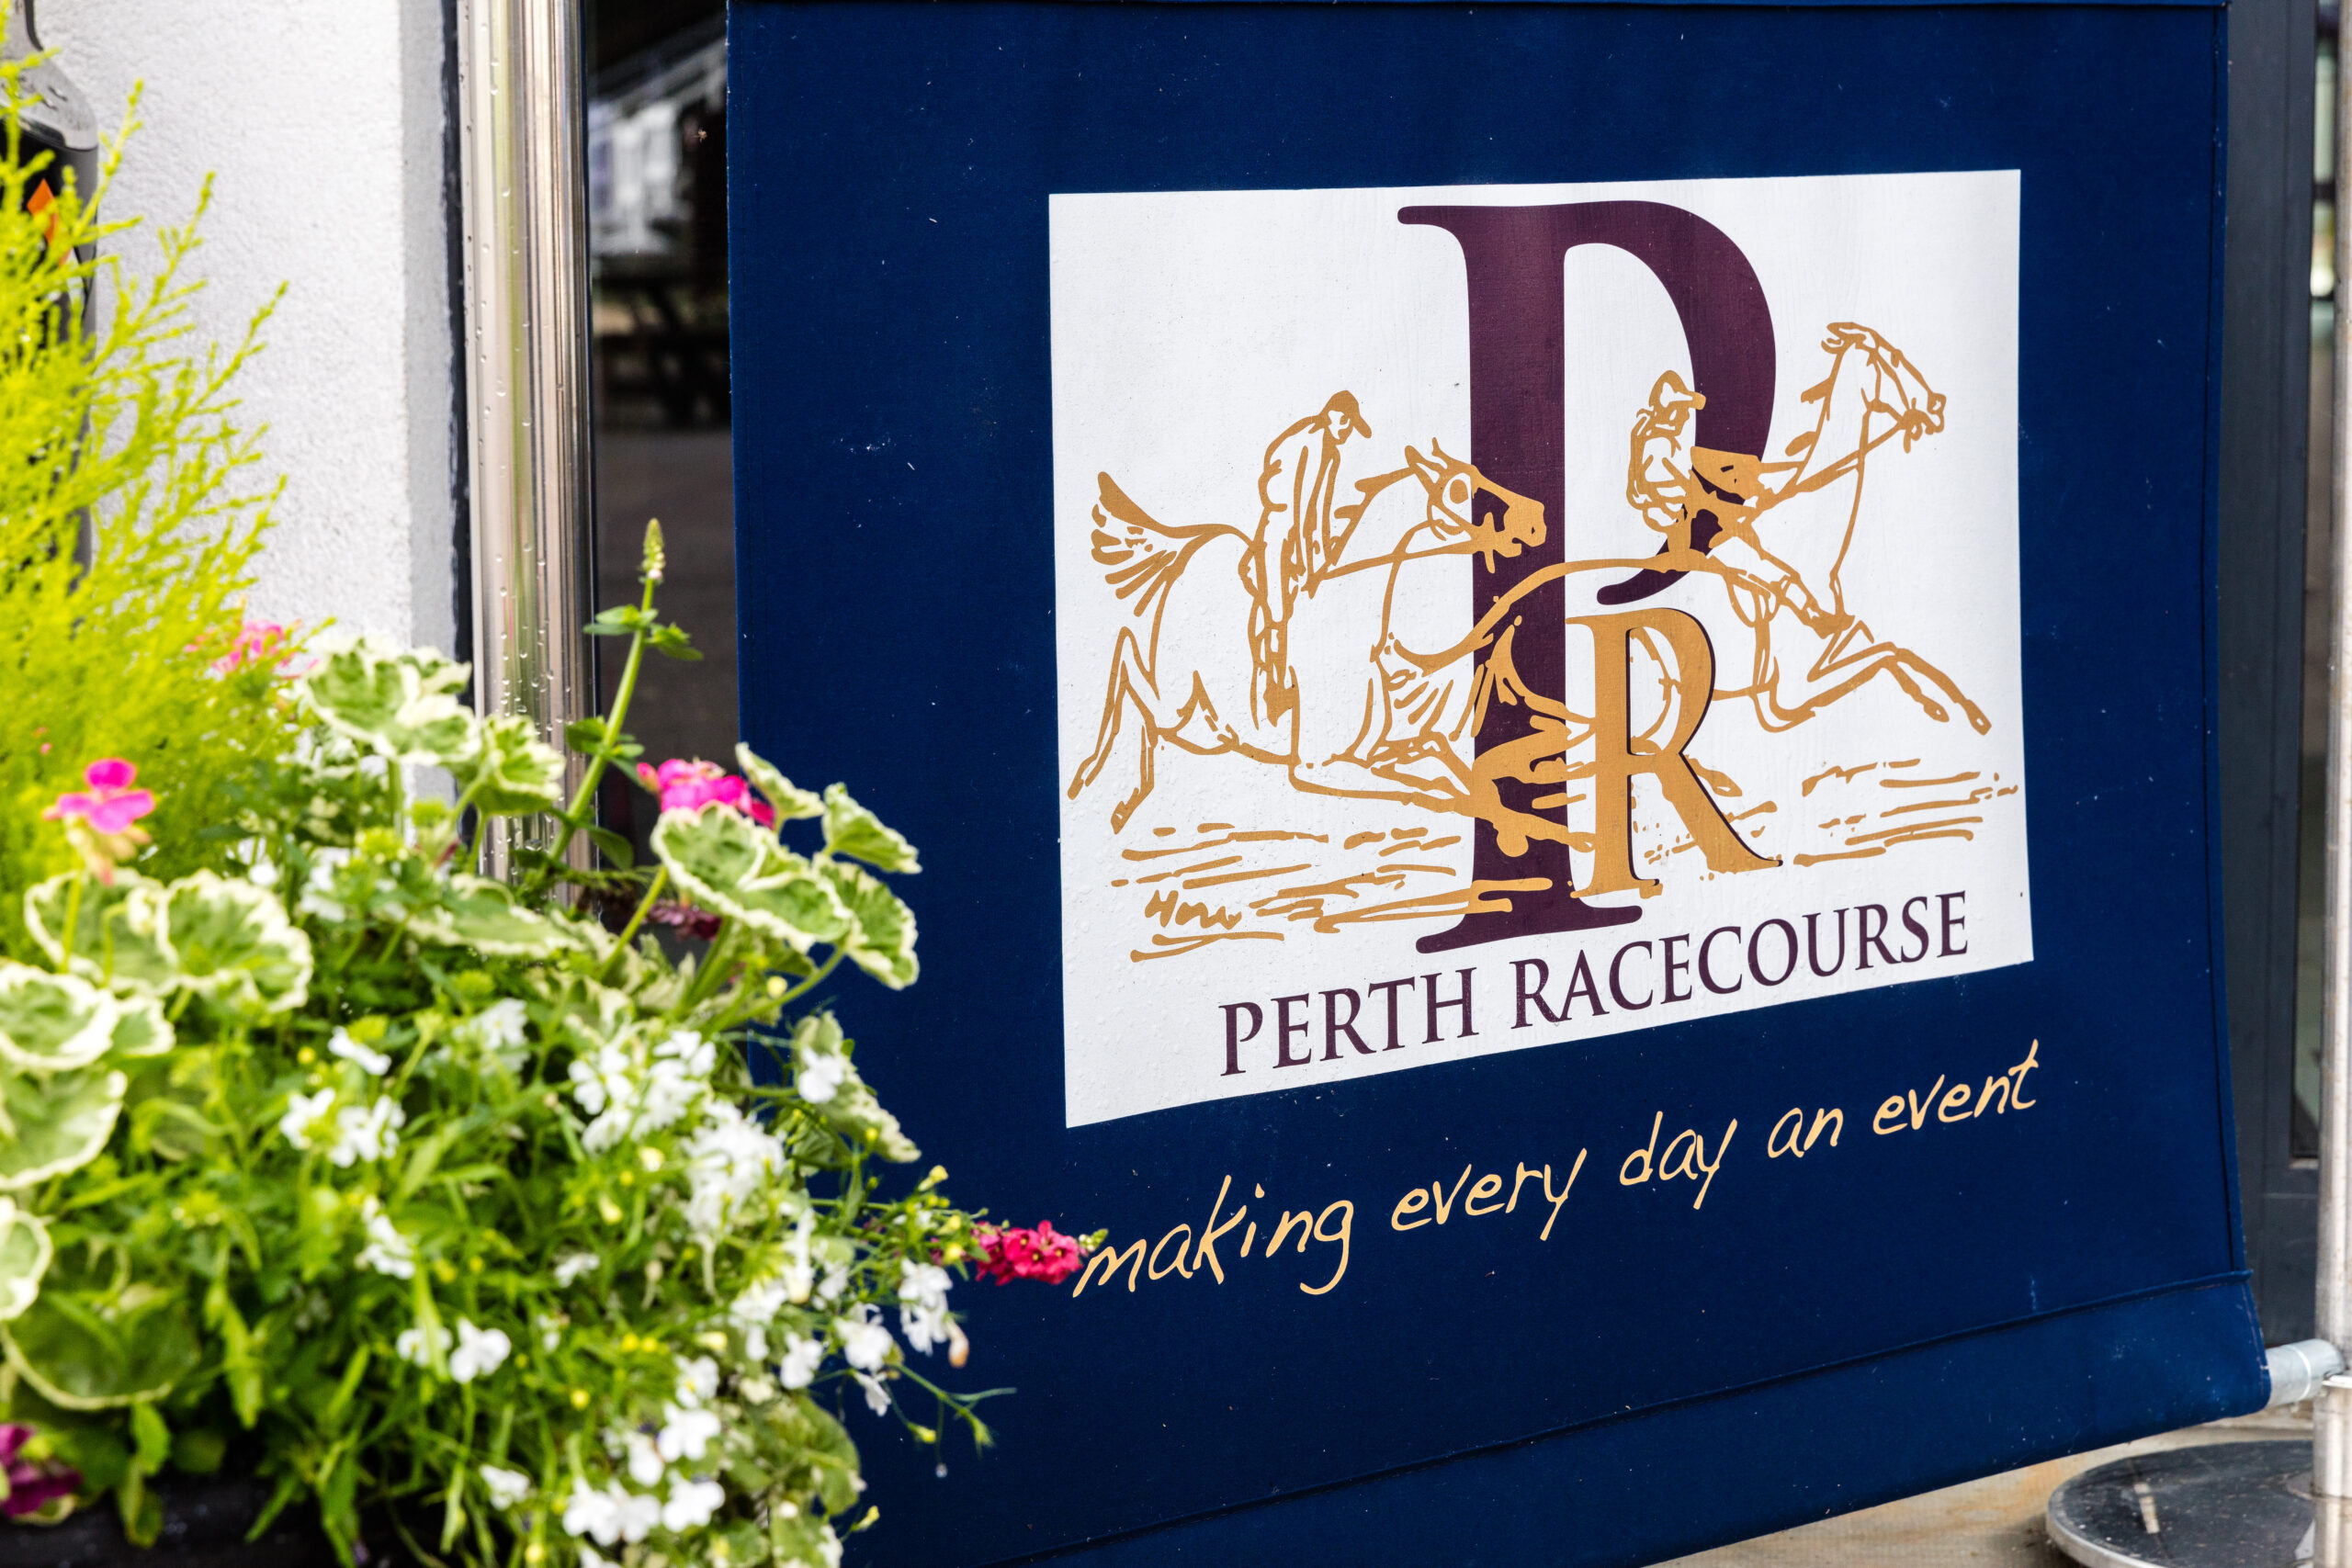 Perth-Racecourse-High-Resolution_88_0-scaled-1.jpg